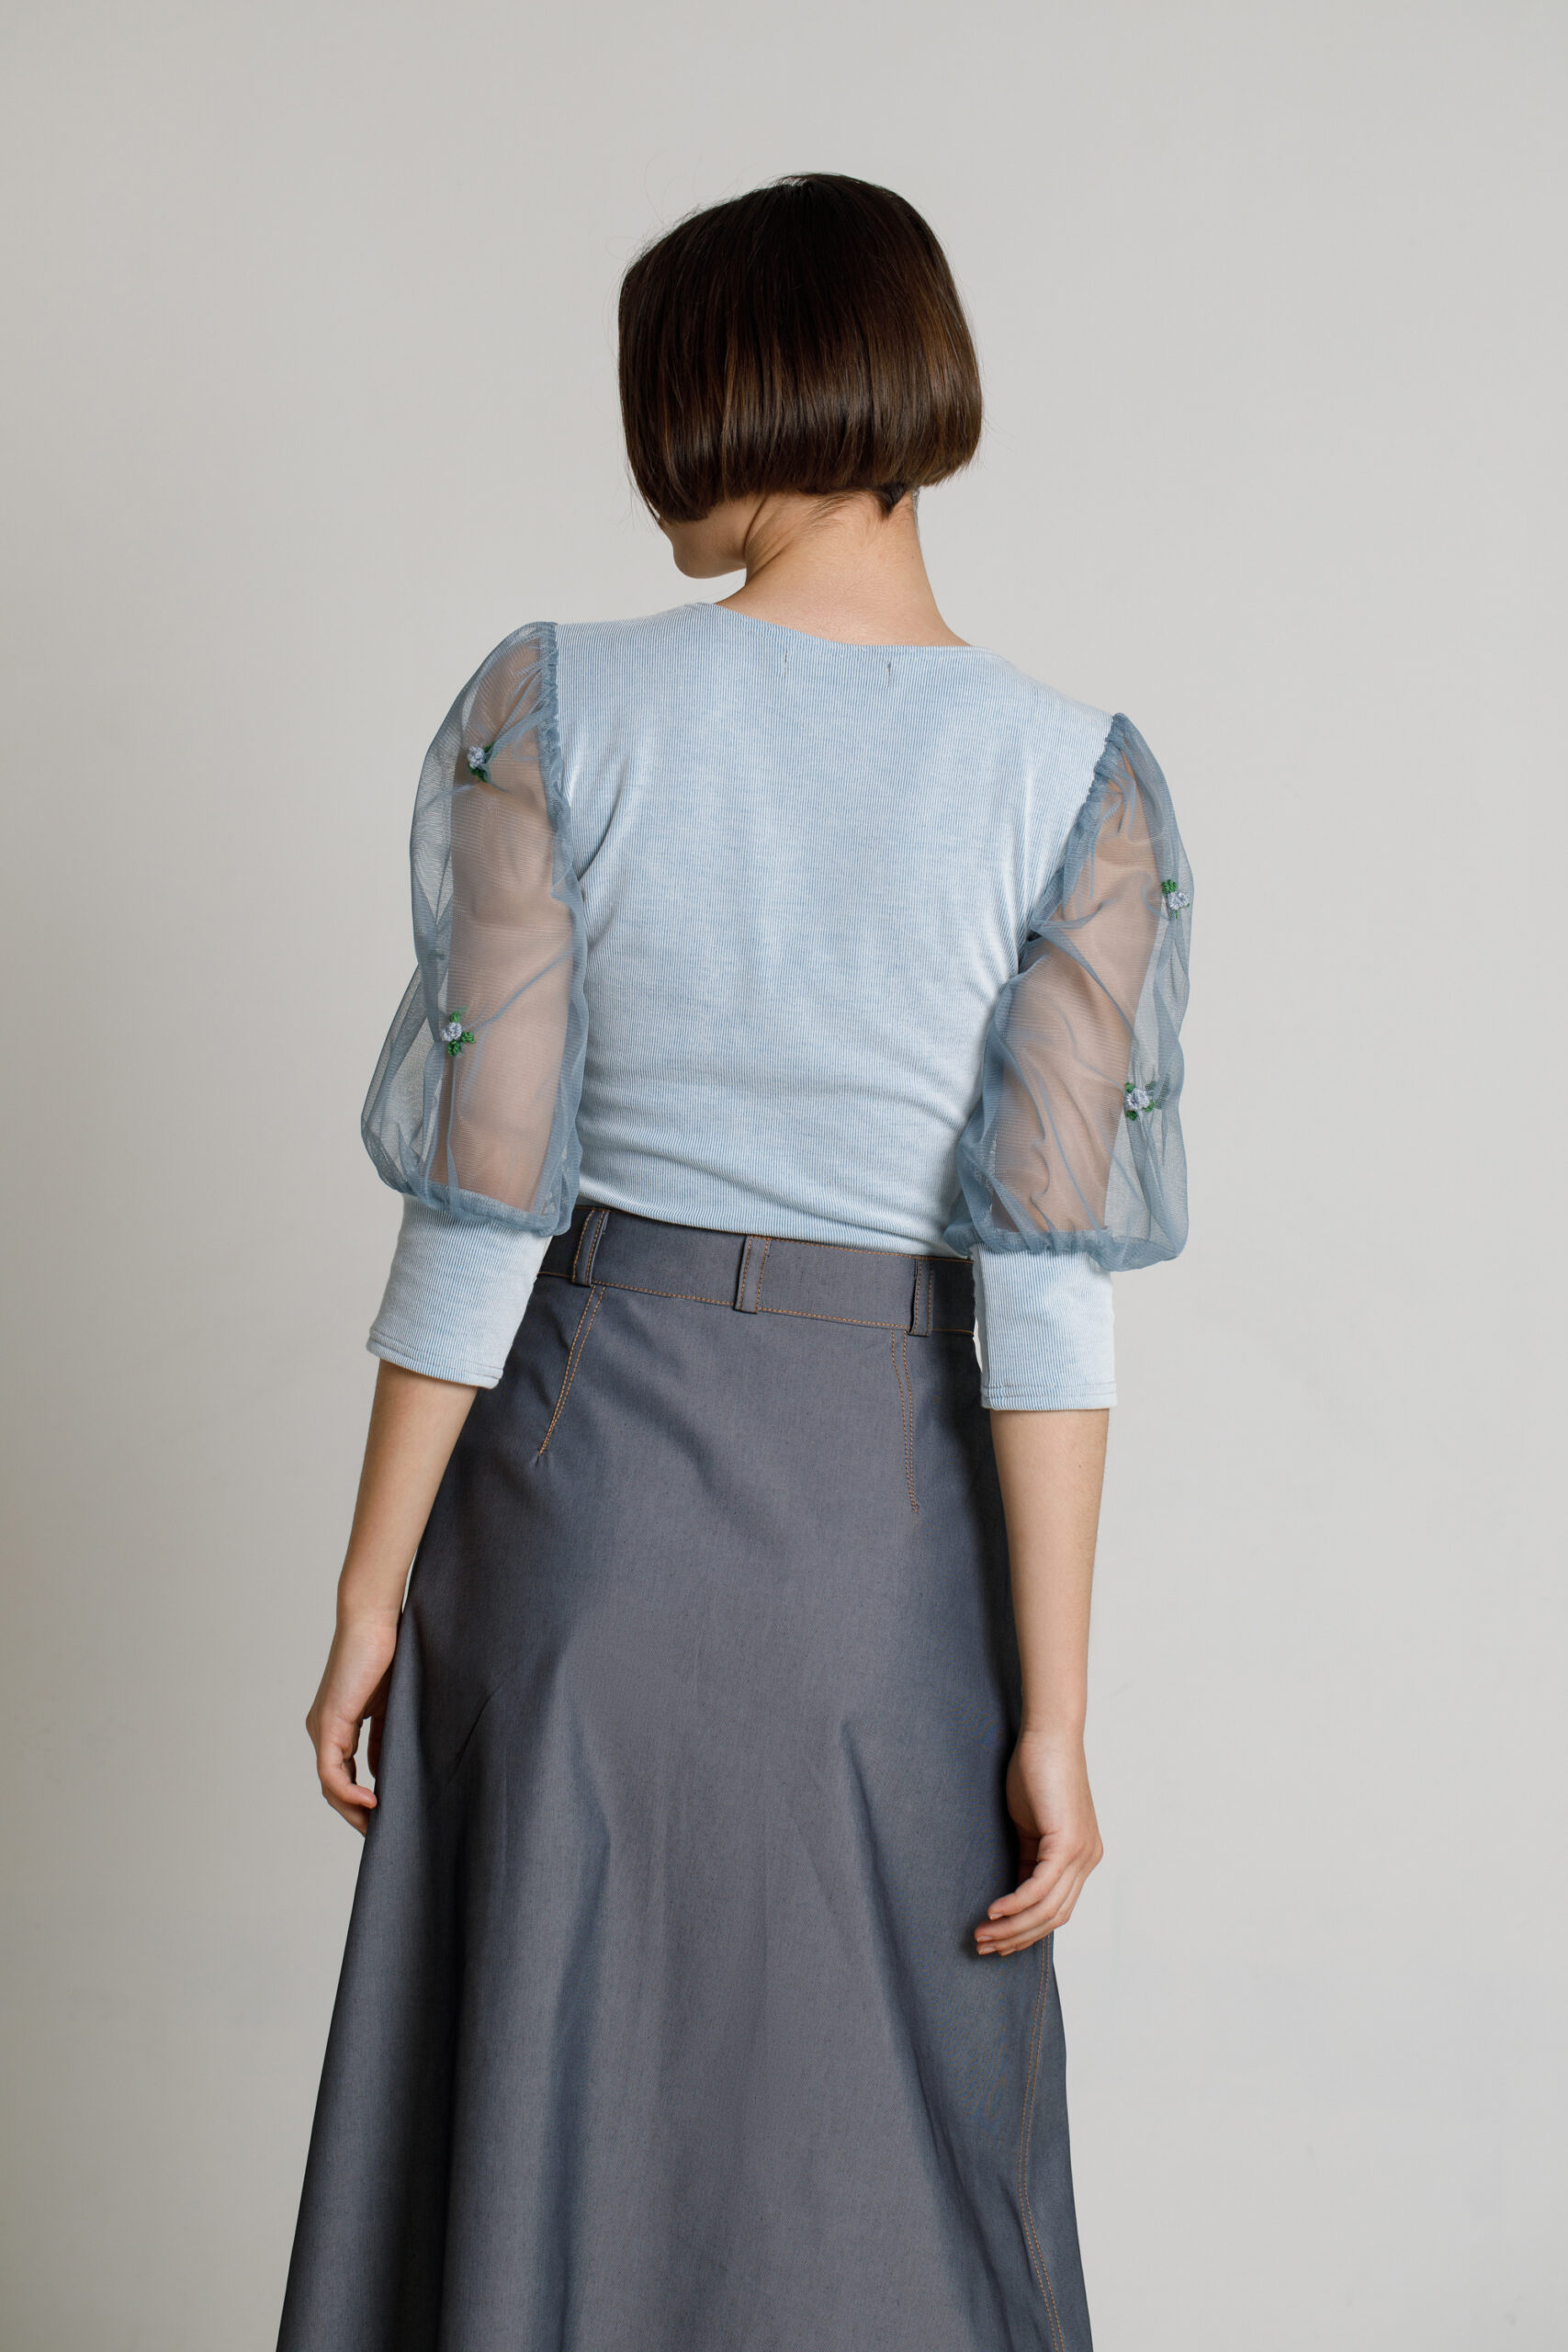 VAS casual blue blouse with tulle sleeves. Natural fabrics, original design, handmade embroidery